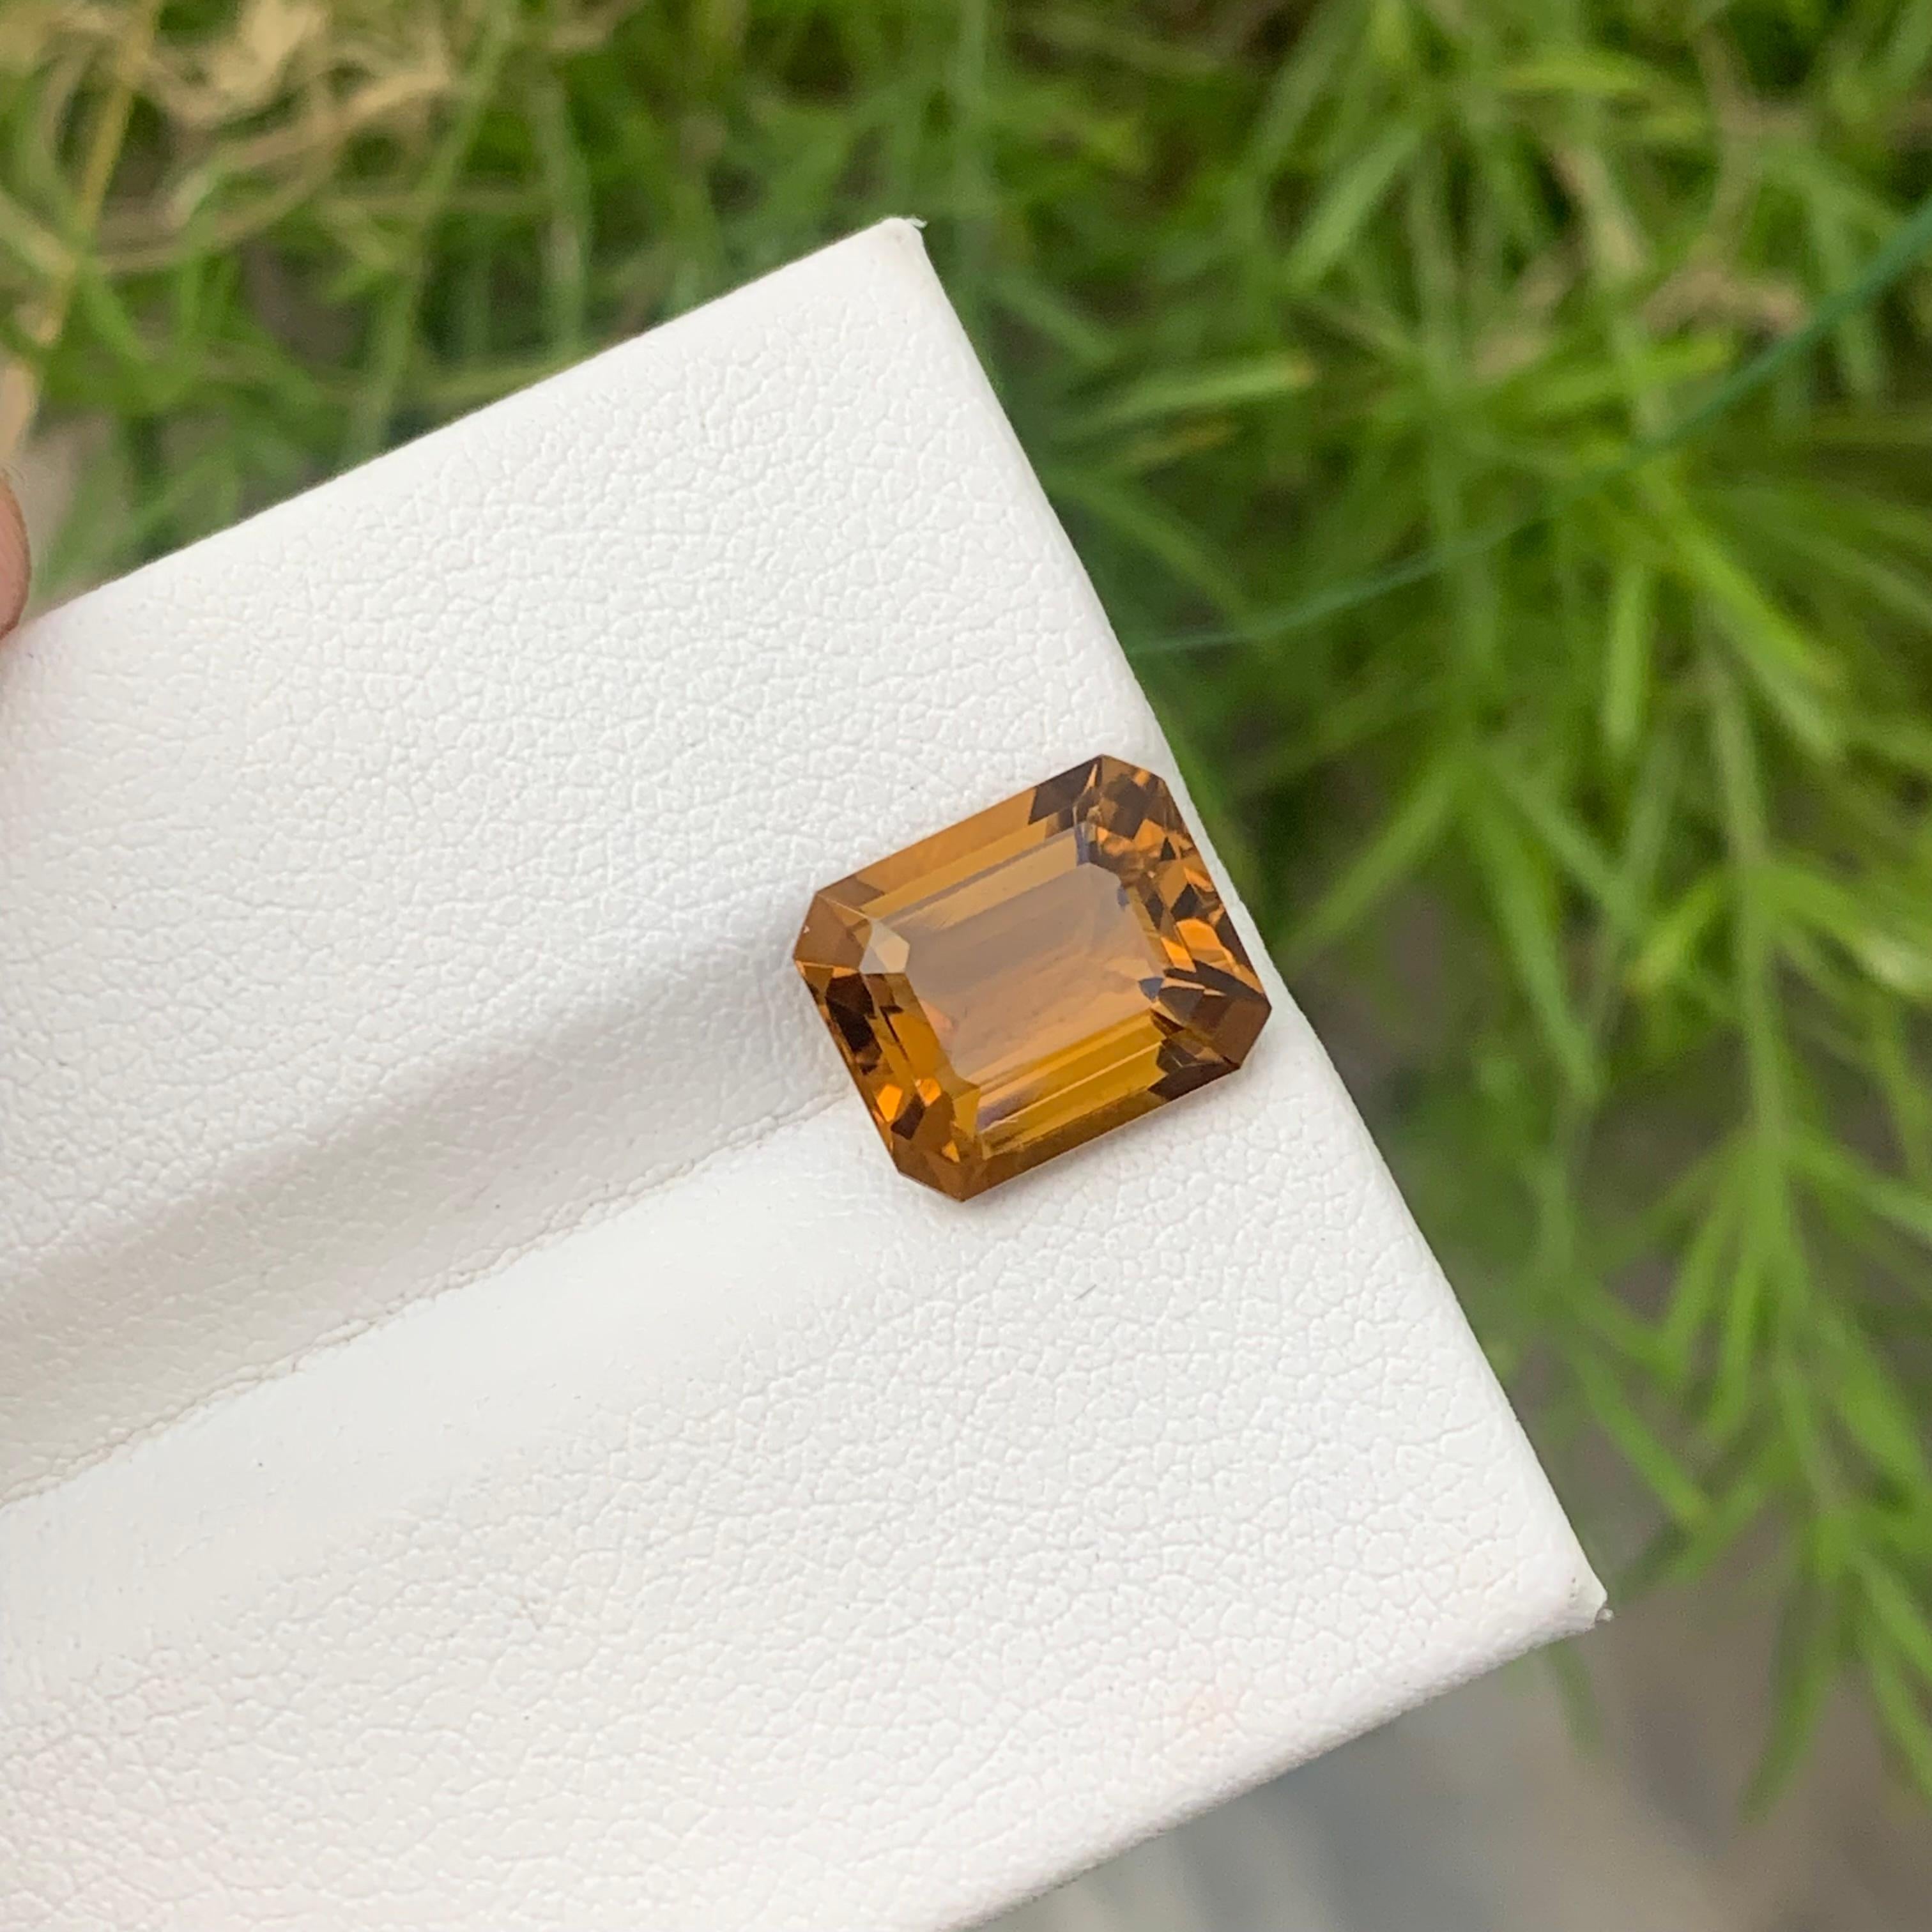 4.20 Carat Natural Loose Citrine Honey Color from Brazil Emerald Cut Gemstone For Sale 1